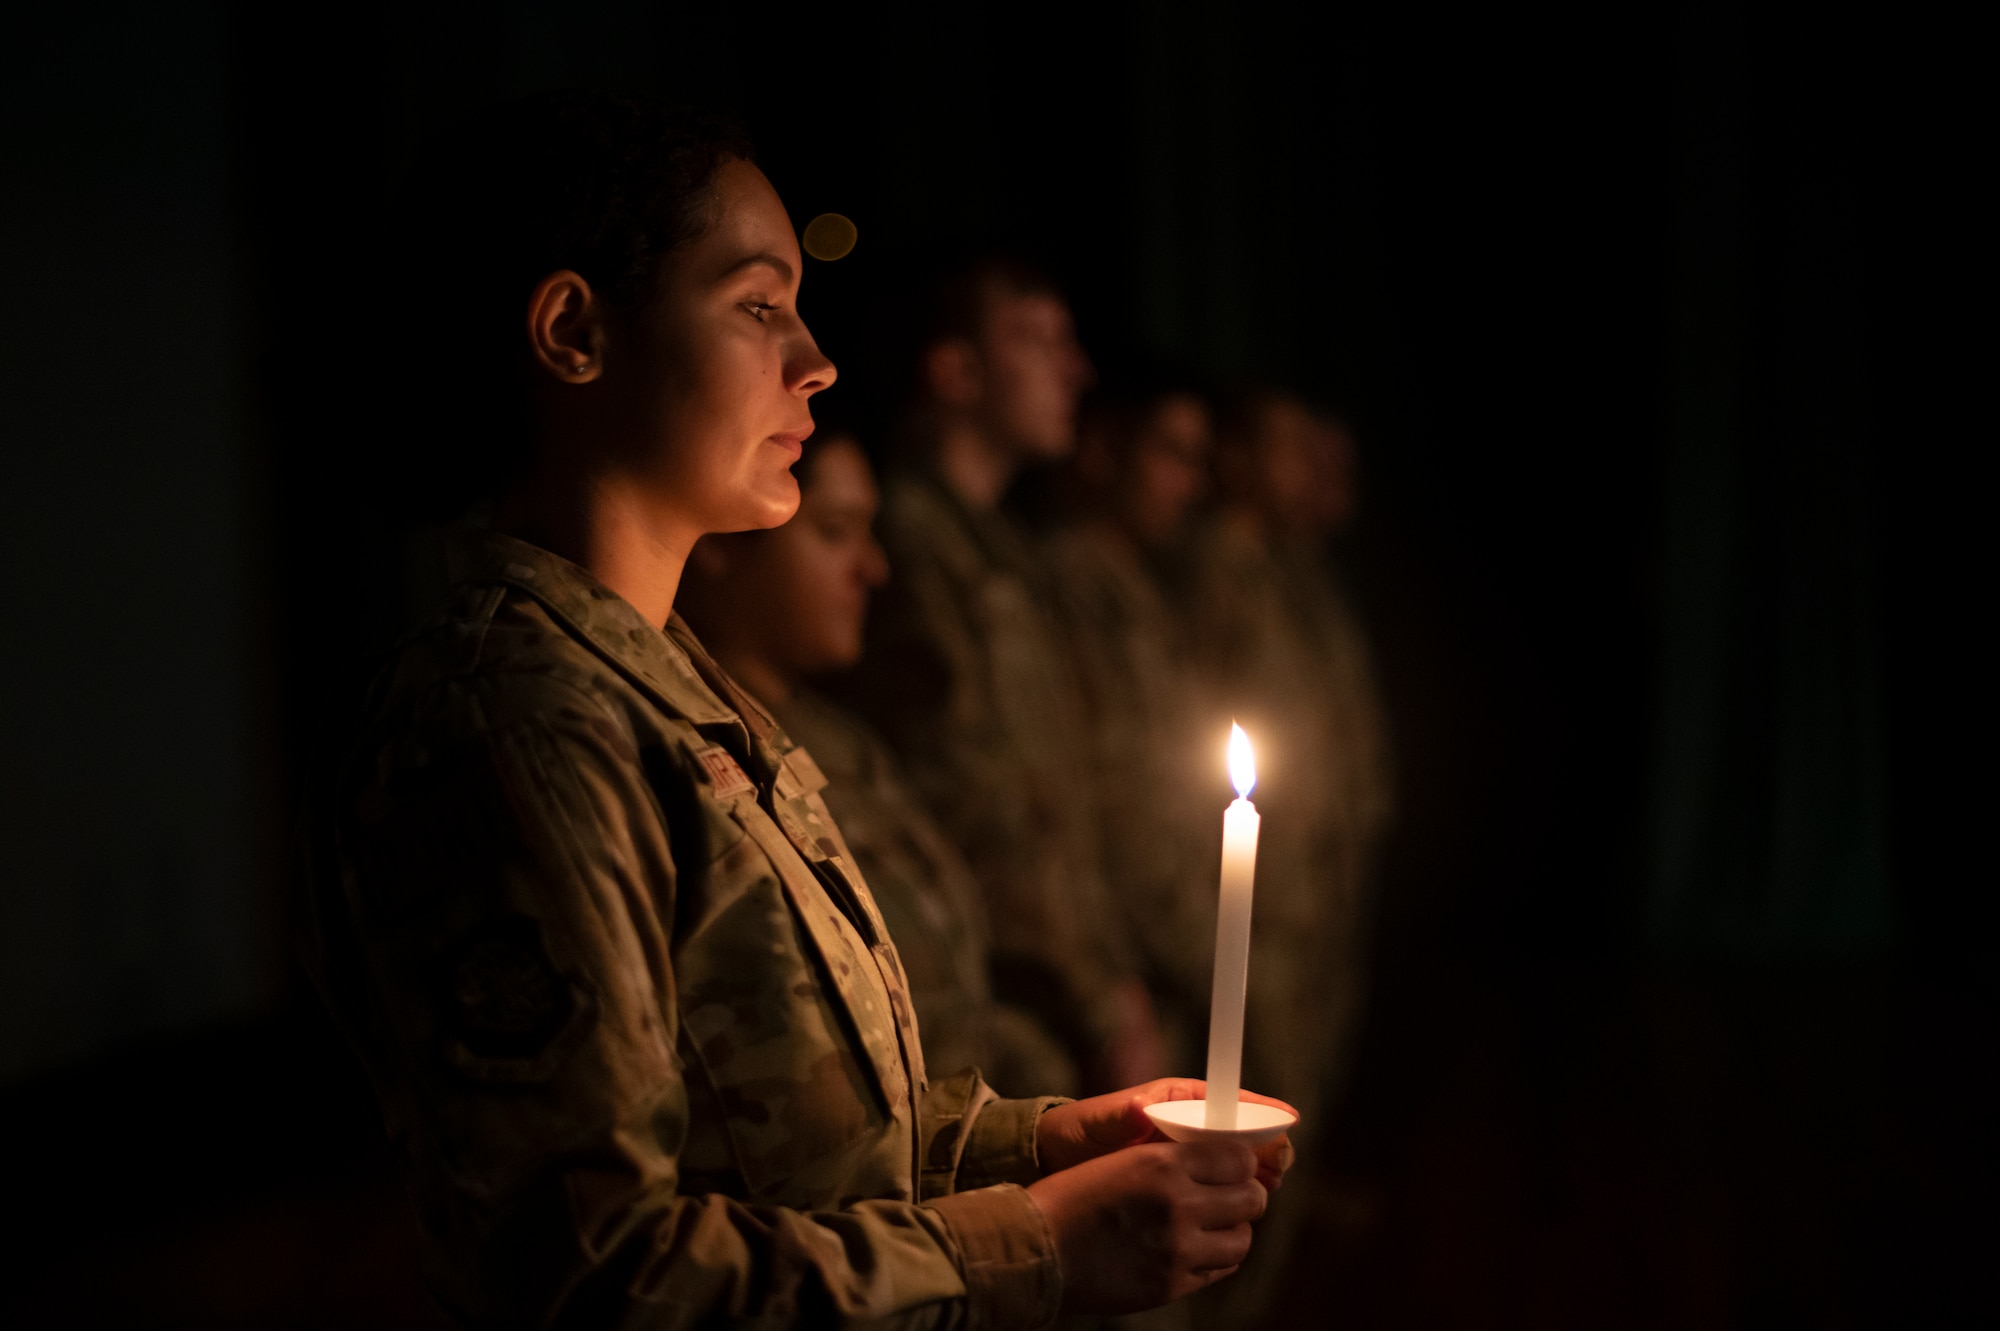 Airman Mireya Rico, 733rd Air Mobility Squadron aircraft services representative, holds a candle during a candlelight ceremony in honor of the Days of Remembrance at Kadena Air Base, Japan, April 29, 2022. Starting in 1939, Jewish people were forced to wear a yellow Star of David on their clothing, isolating them from the rest of society and making them easier to target. (U.S. Air Force photo by Senior Airman Jessi Monte)